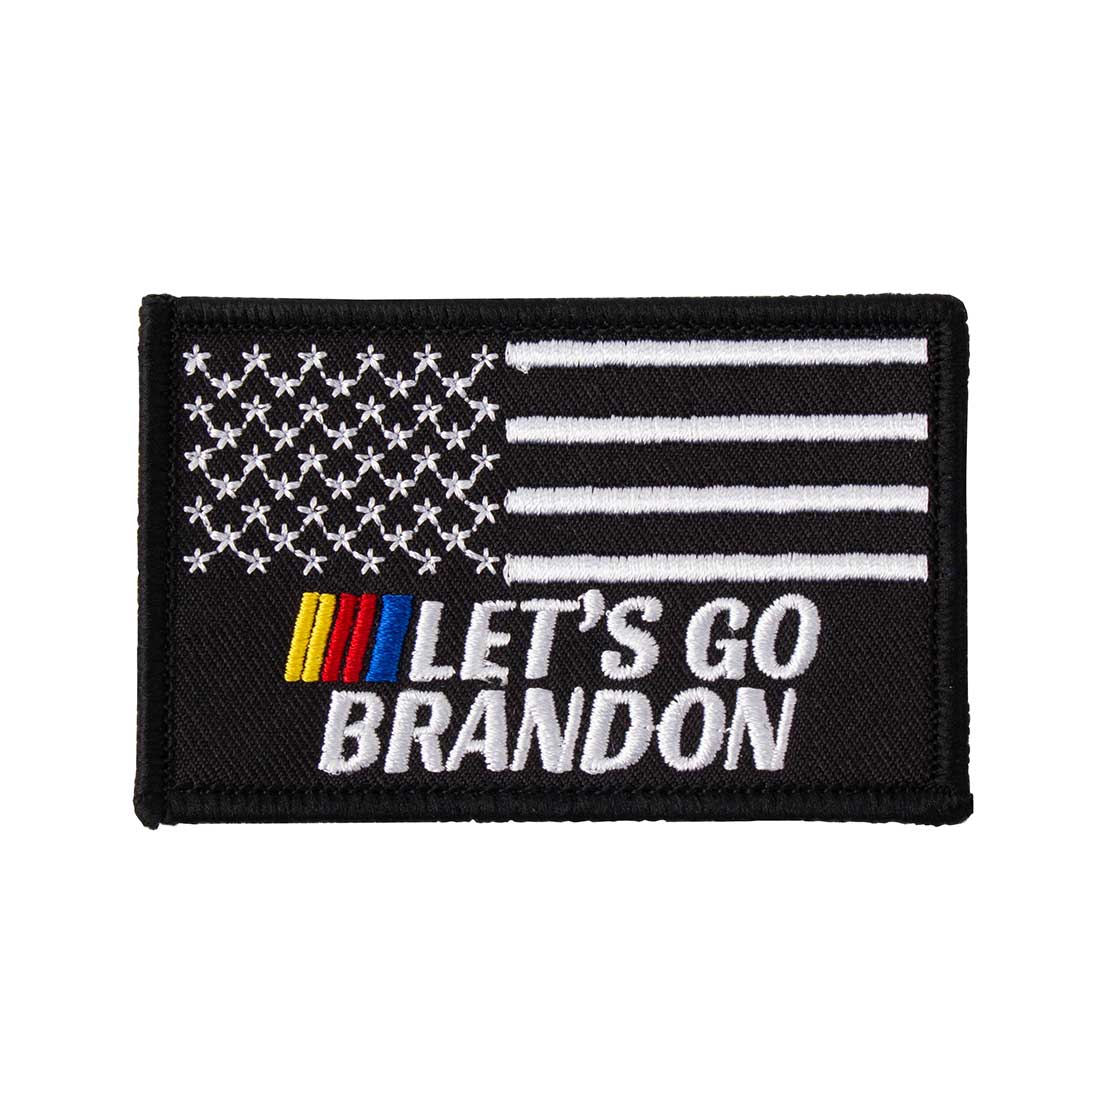 Dengbb 8 Pcs Let's Go Brandon Patches Patch Embroidery Military Hook Fastener Patch for Caps Bags Vests Military Uniforms